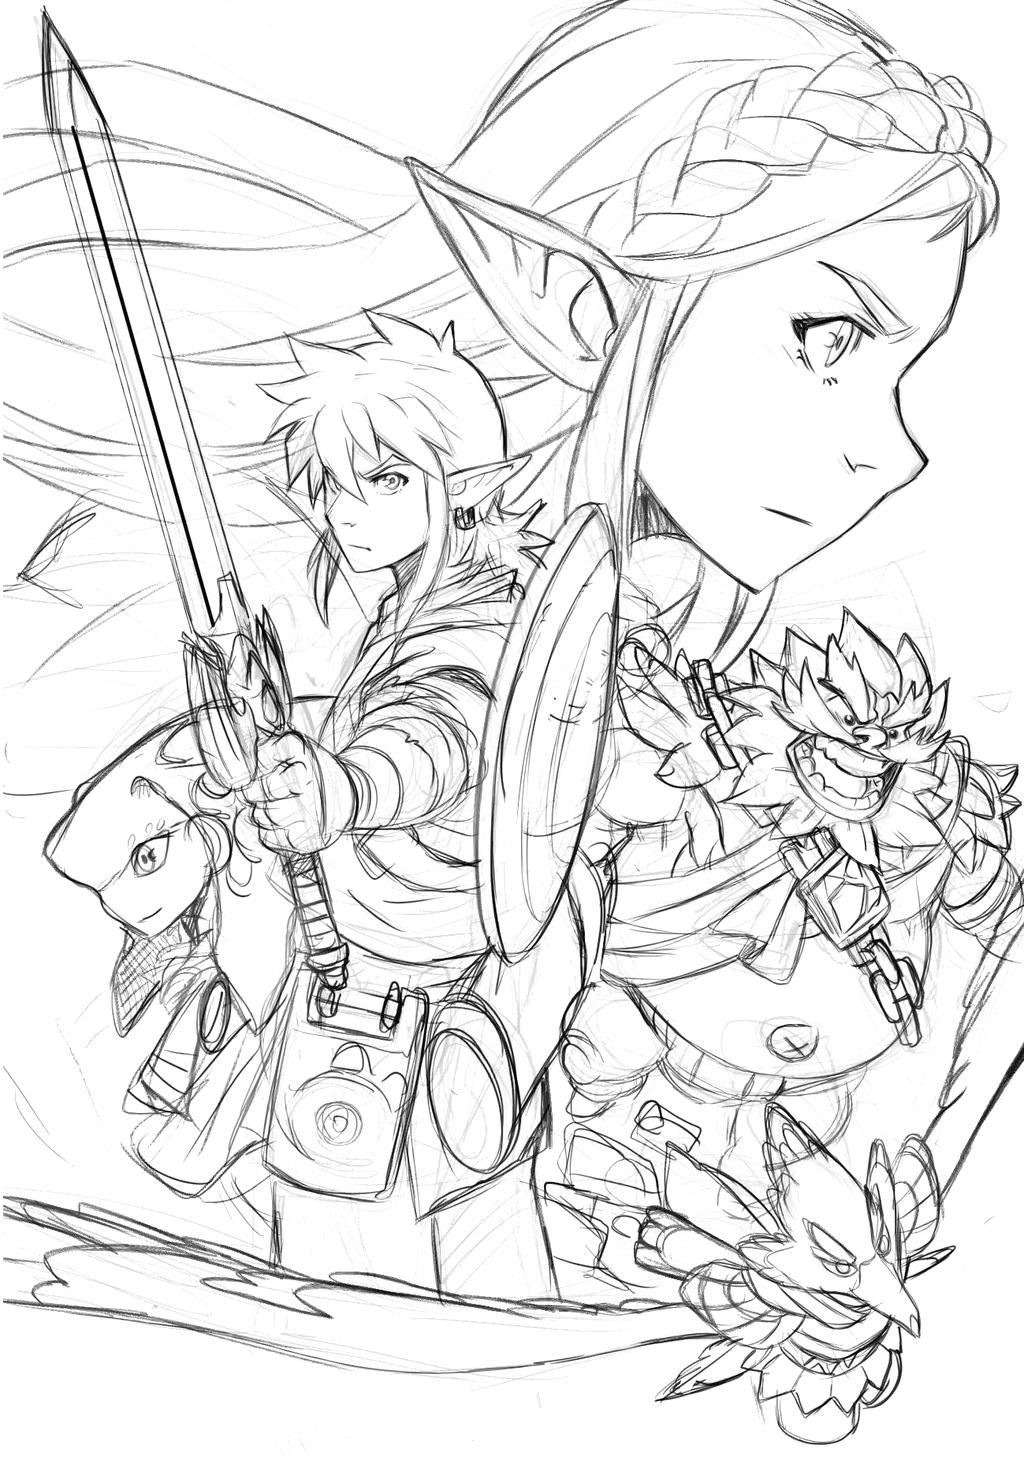 Zelda Breath Of The Wild - [Sketched Composition] by loboborges on